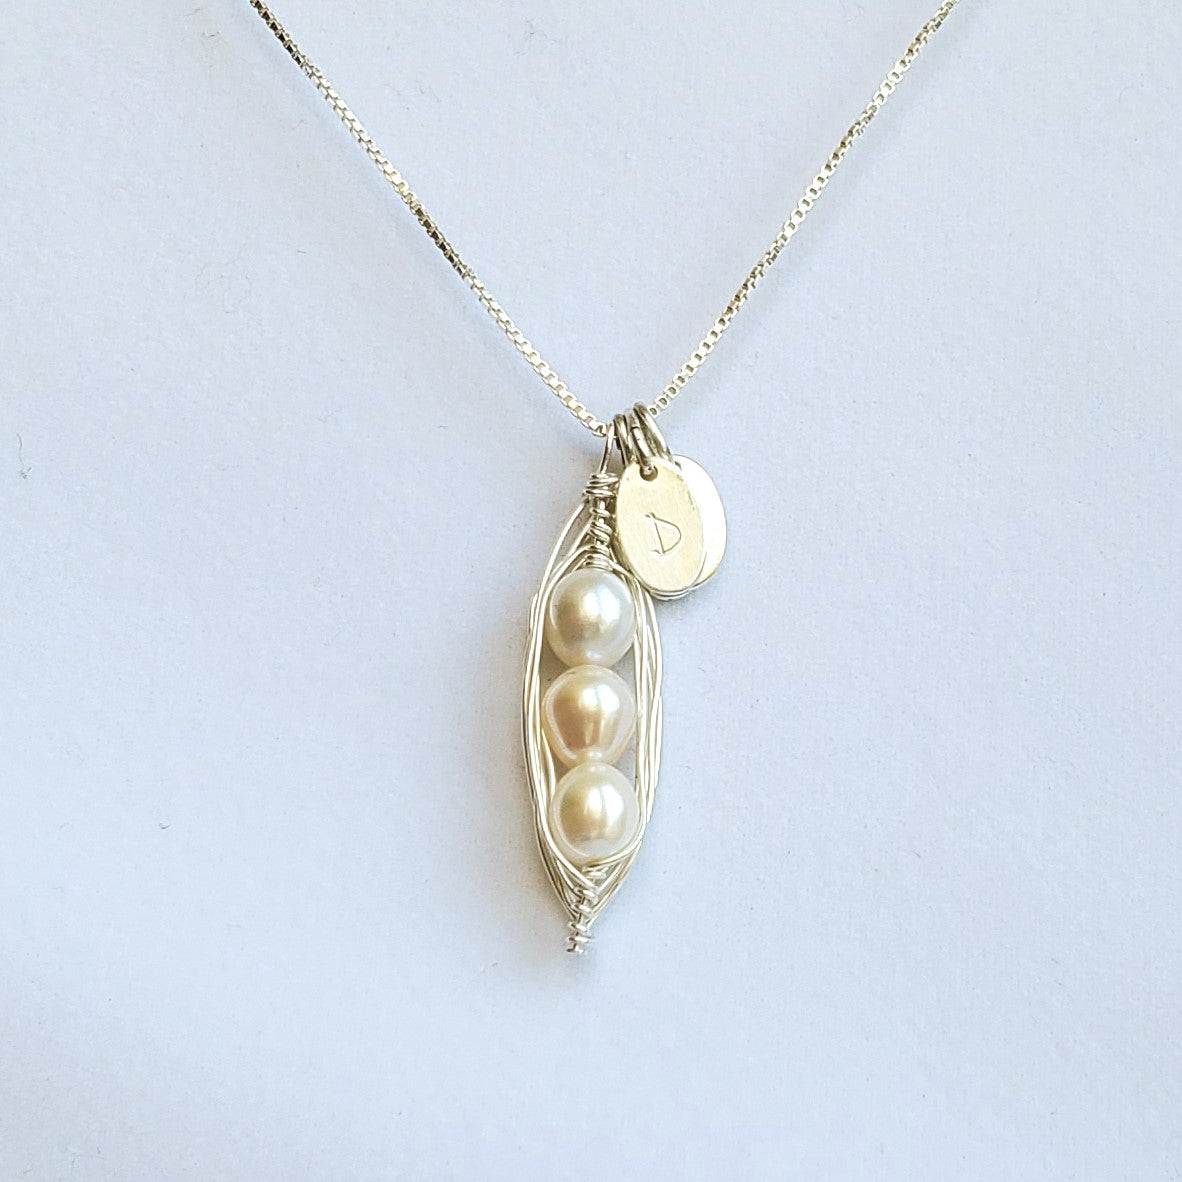 Wire-wrapped sterling silver pea pod necklace with freshwater pearls and initial charms